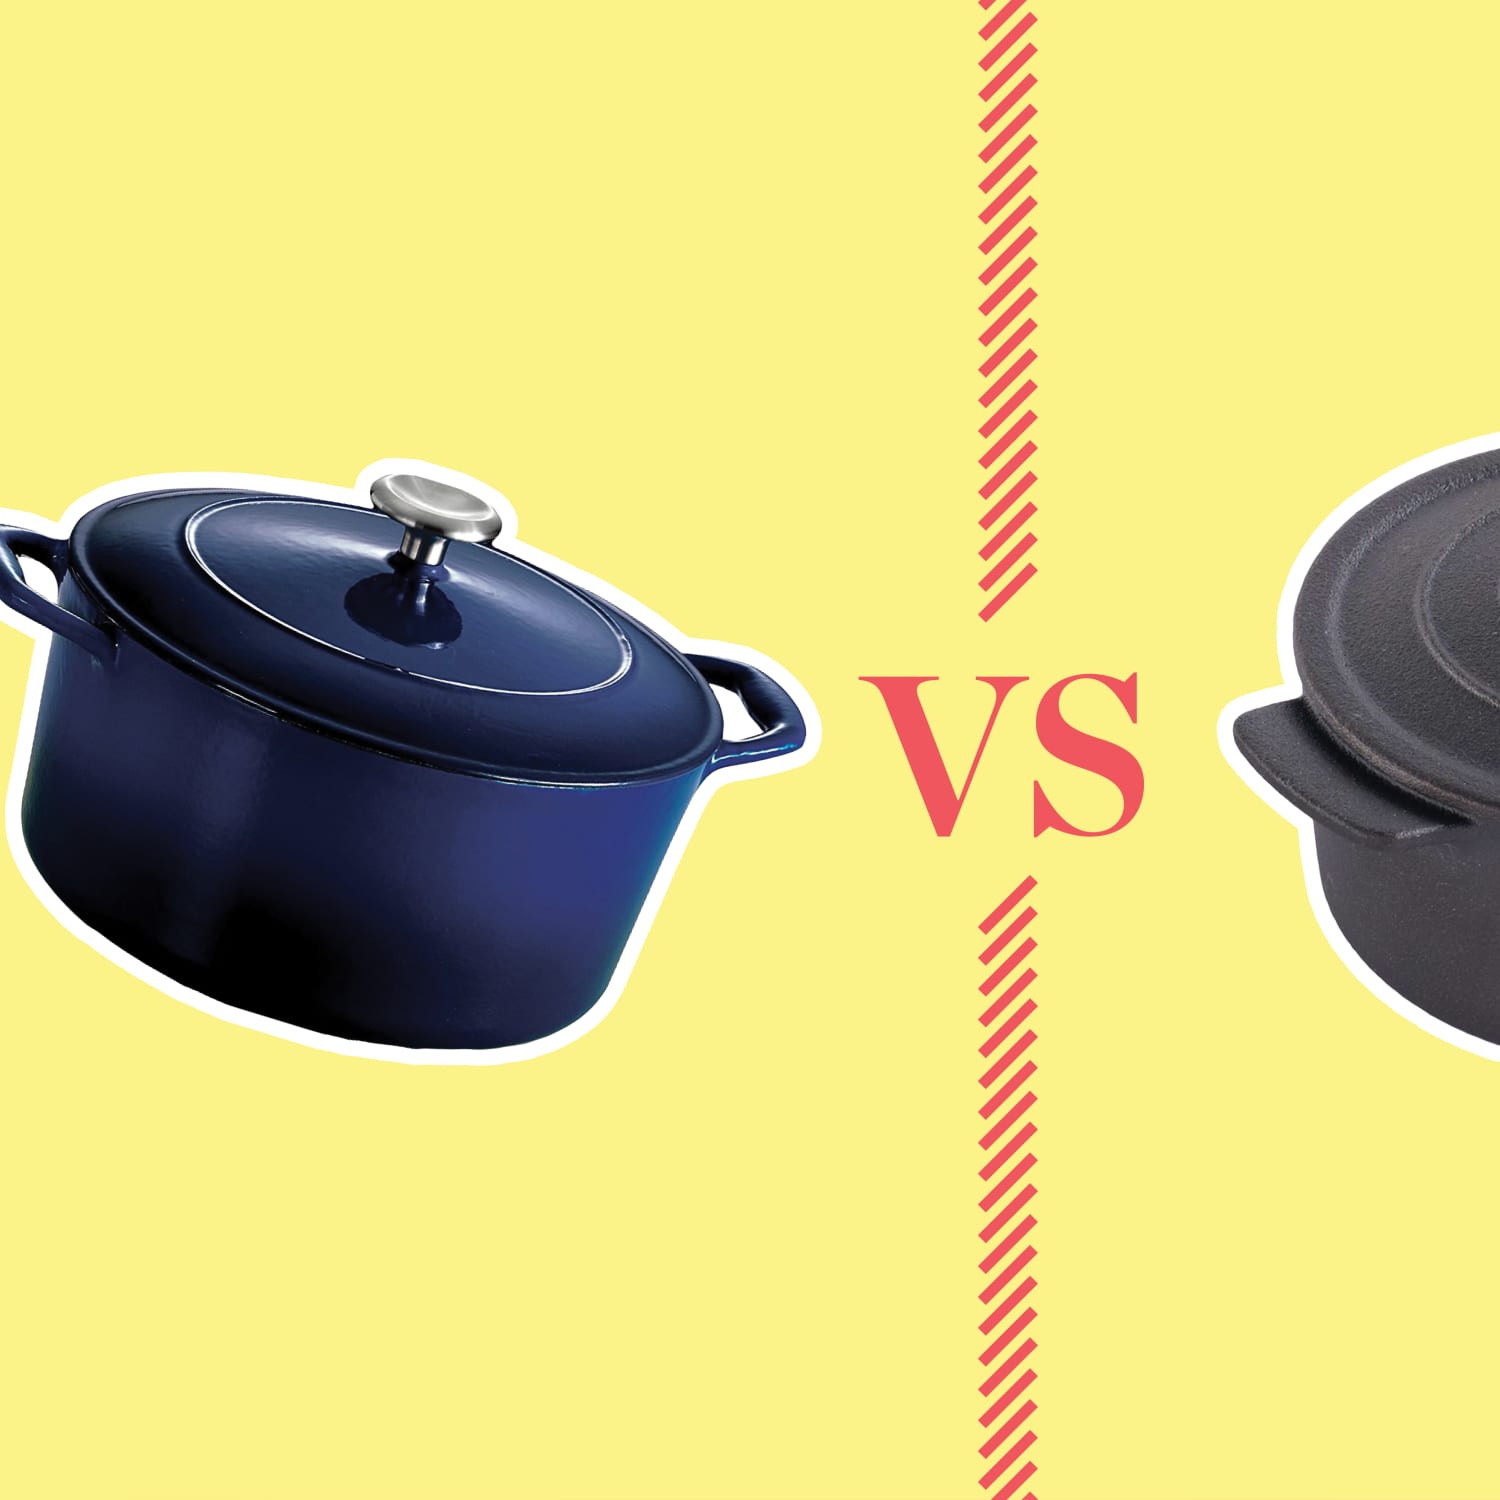 Cocotte vs. Dutch Oven: What's the Difference? - Made In